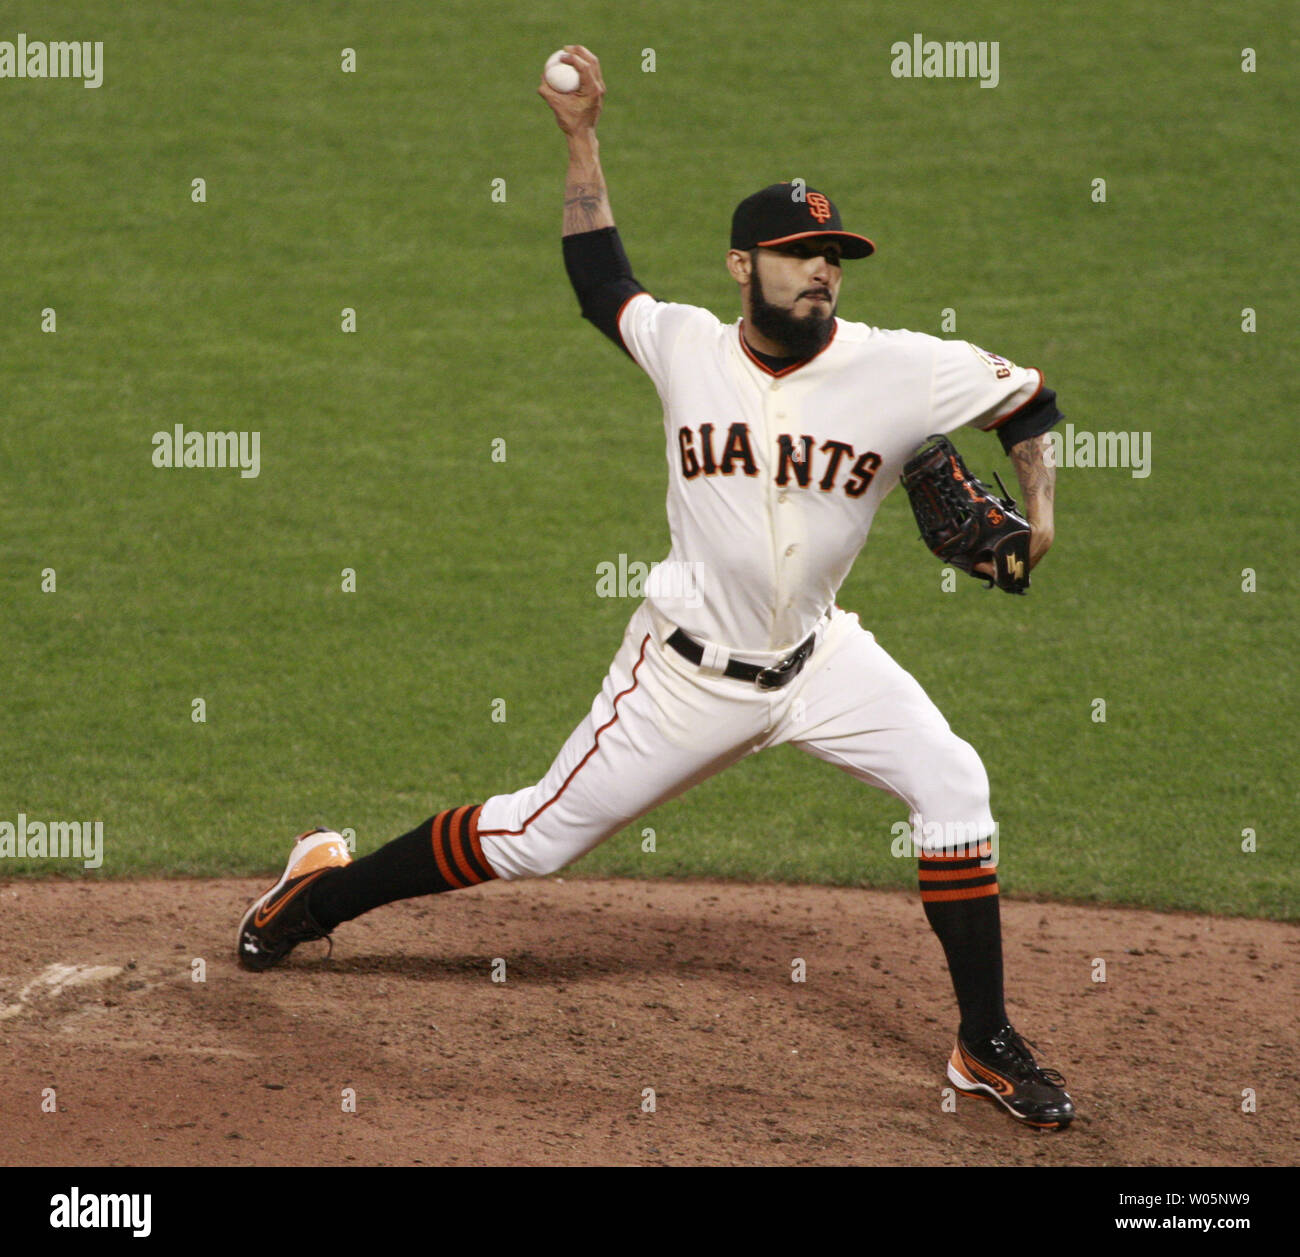 San Francisco Giants Sergio Romo throws to the St. Louis Cardinals in the ninth inning of game six of the National League Championship Series at AT&T Park in San Francisco on October 21, 2012. The Giants defeated the Cardinals 6-1 to force a game seven.   UPI/Bruce Gordon Stock Photo